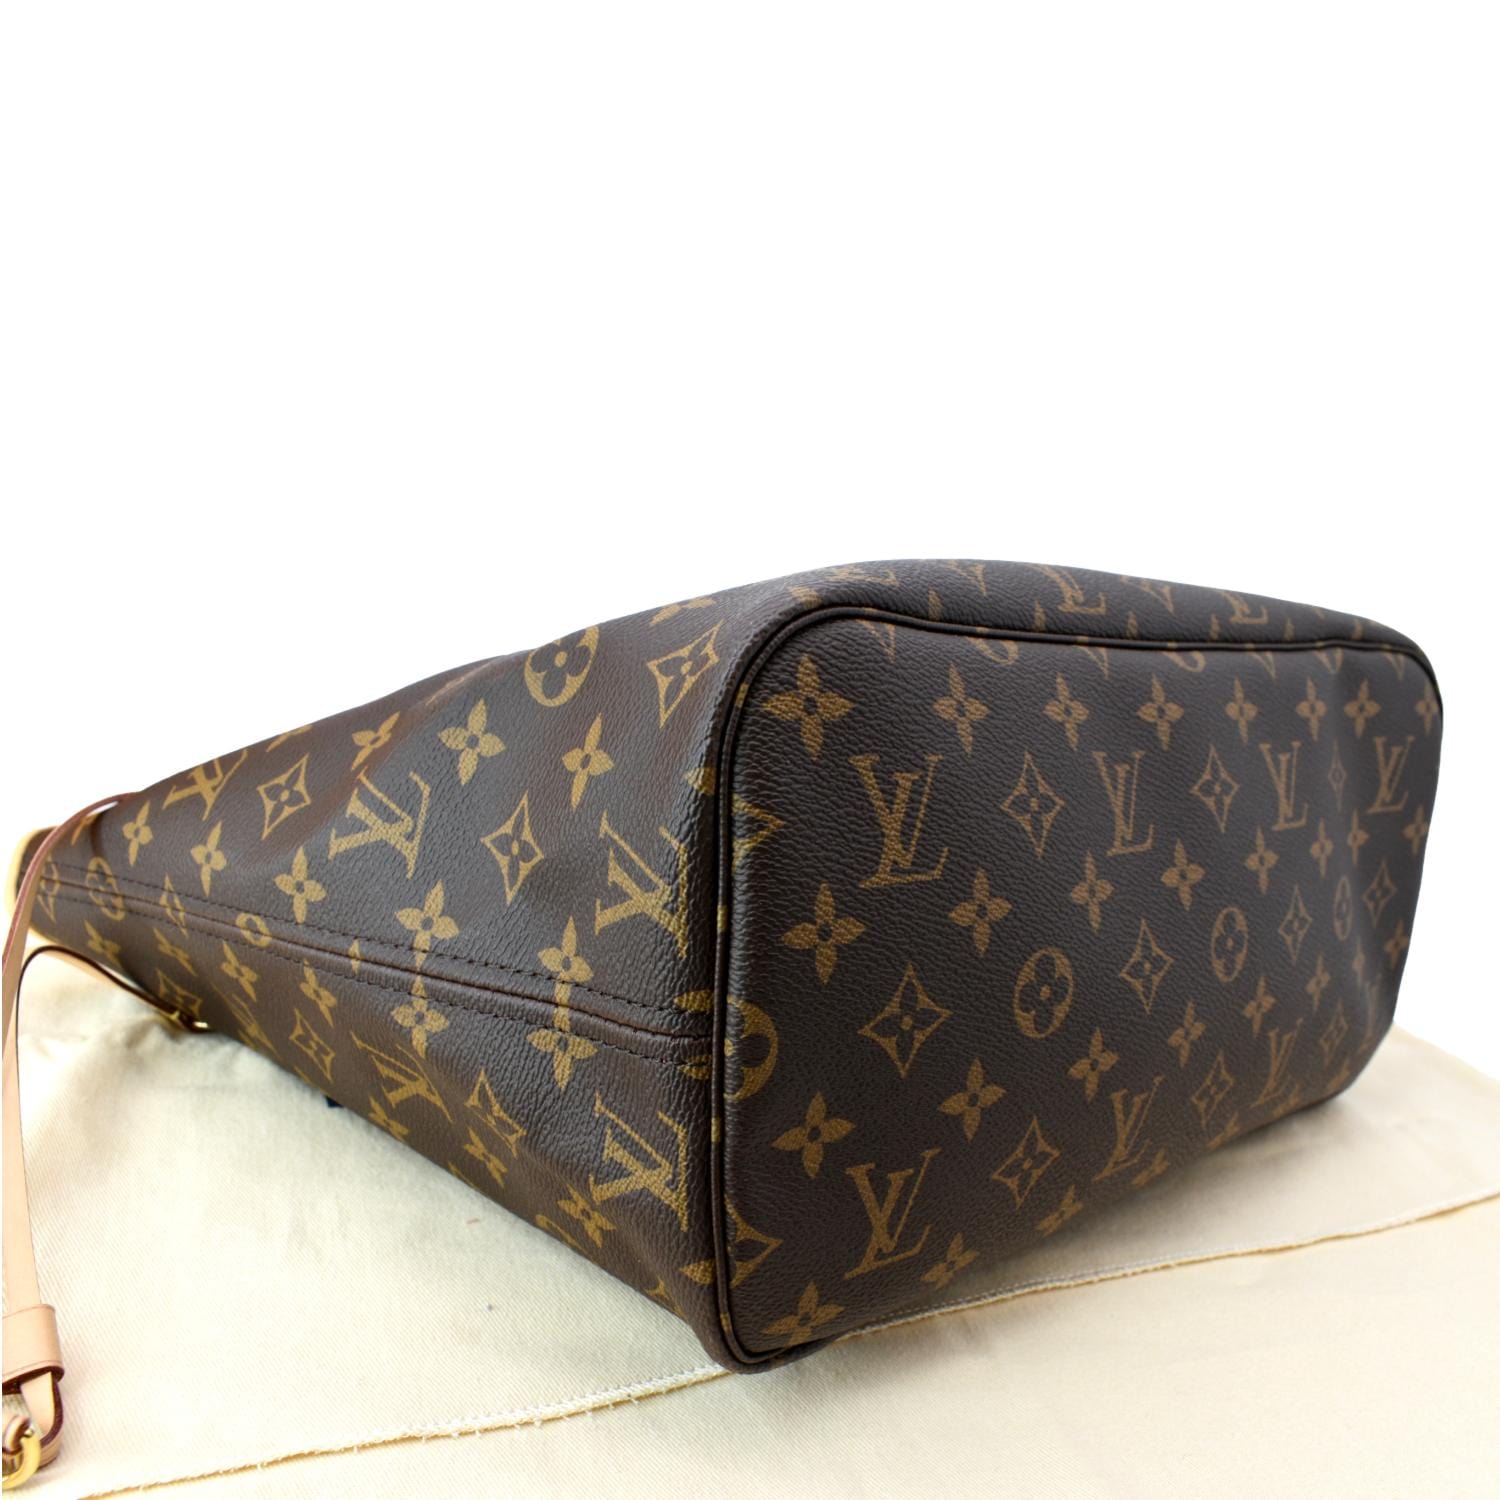 LOUIS VUITTON Monogram Idylle Neverfull MM Tote Bag Brown M40513 LV Auth  rd4149